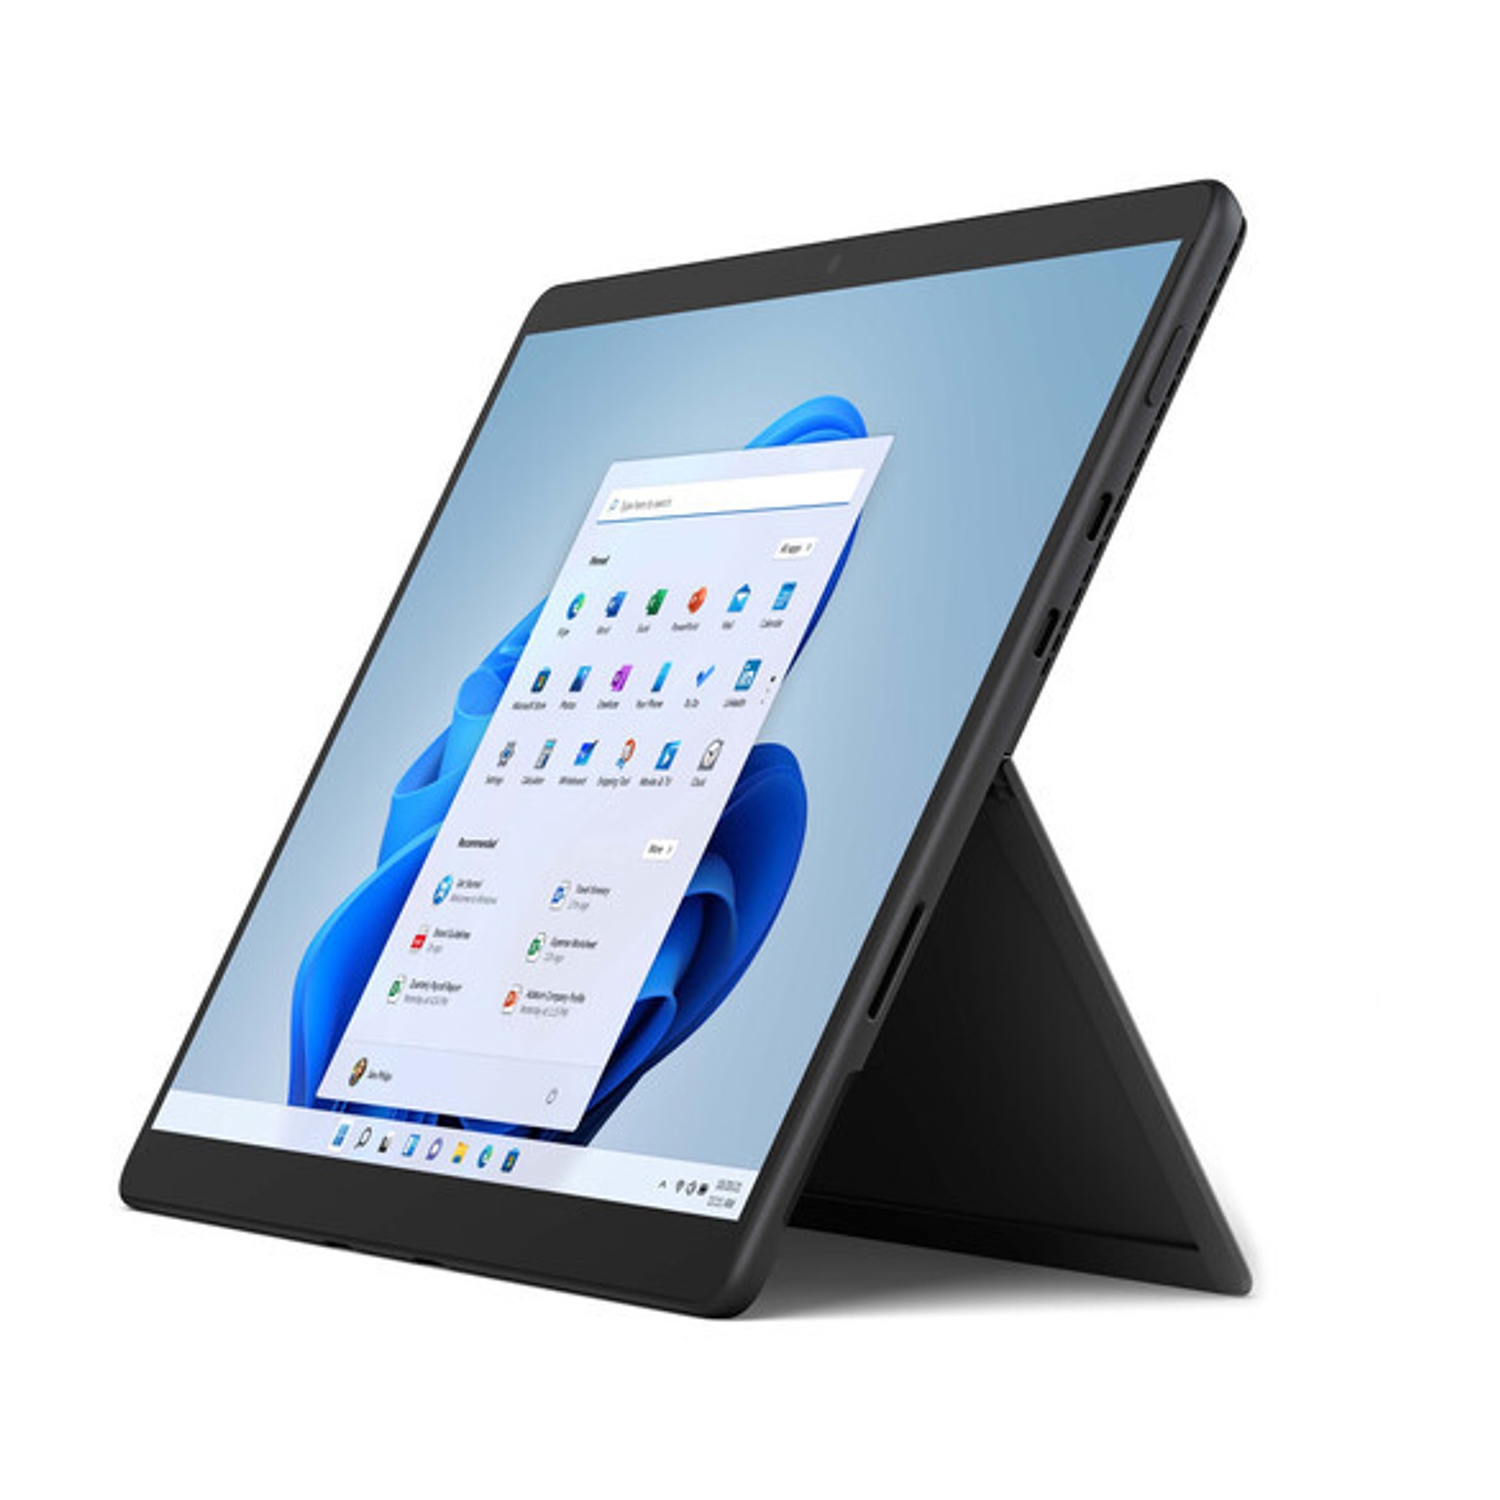 Refurbished (Excellent) Microsoft Surface Pro 8 Tablet – Intel i7, 16GB RAM, 512GB SSD, 13” Touchscreen, Windows 11, Graphite - Accessories Sold Separately